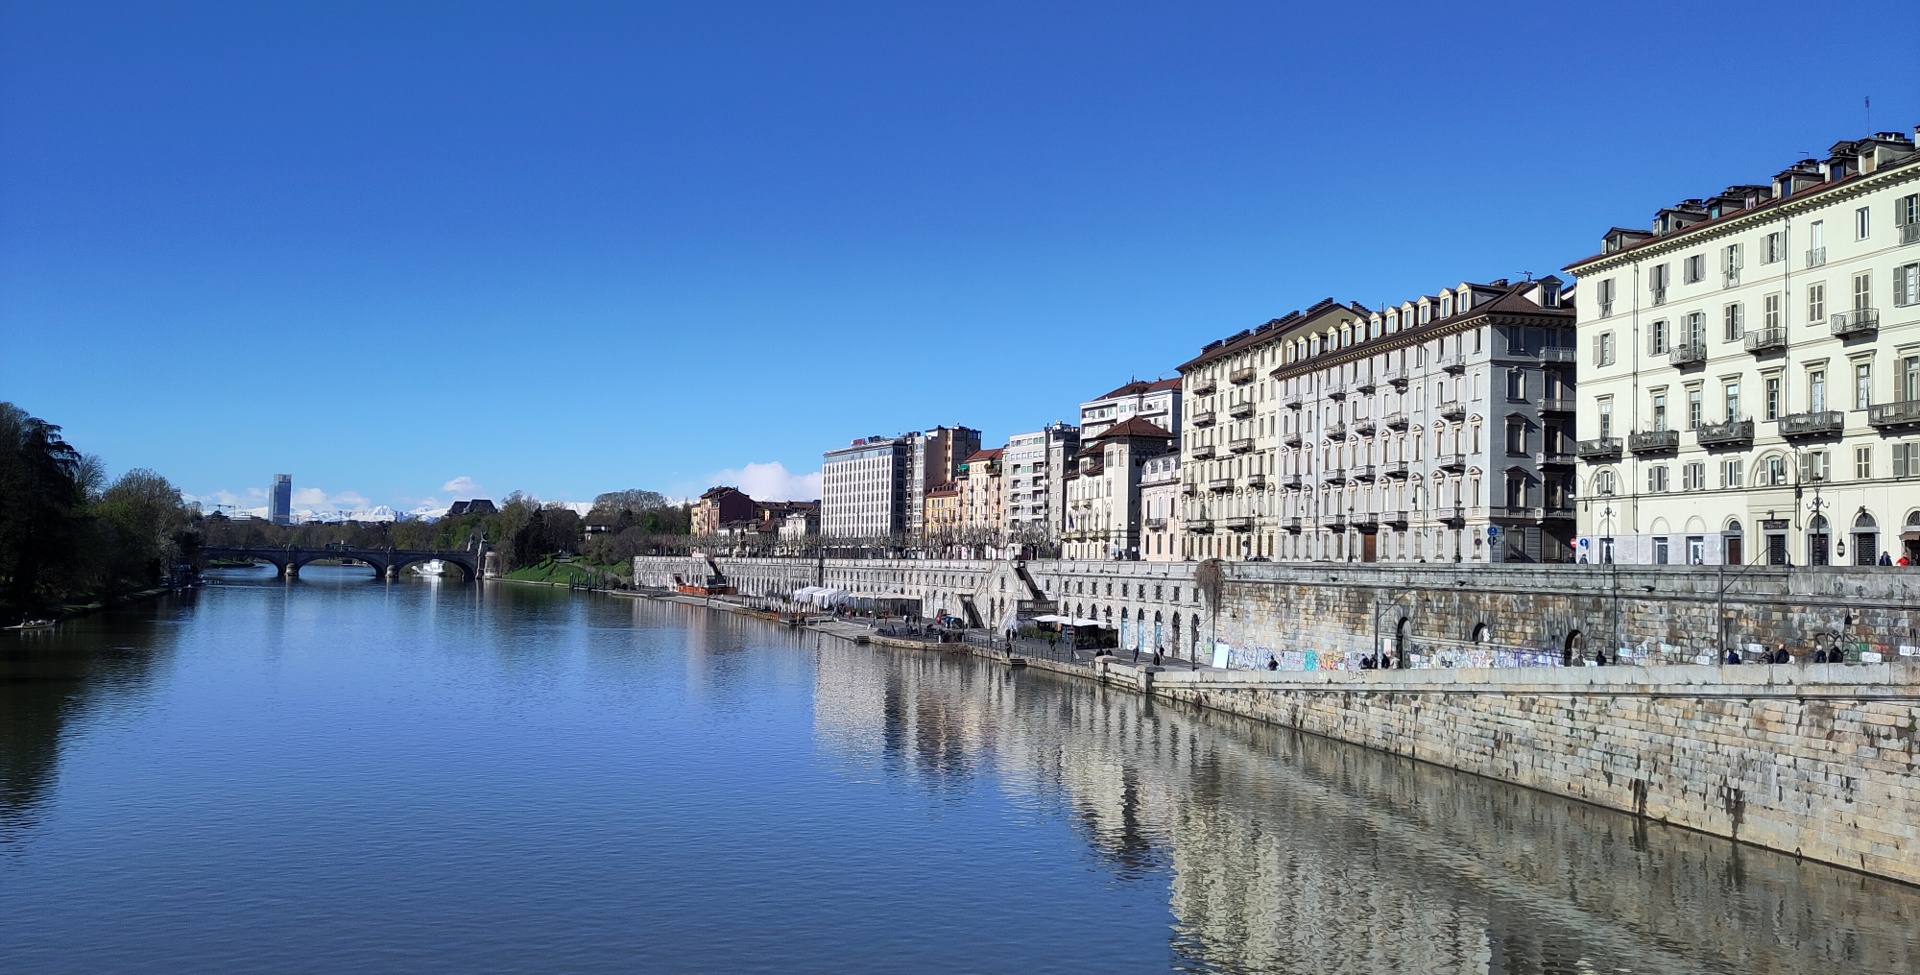 A sunny view of the Torino quays, with buildings on the right. Very far away, you can see snowy mountaintops.